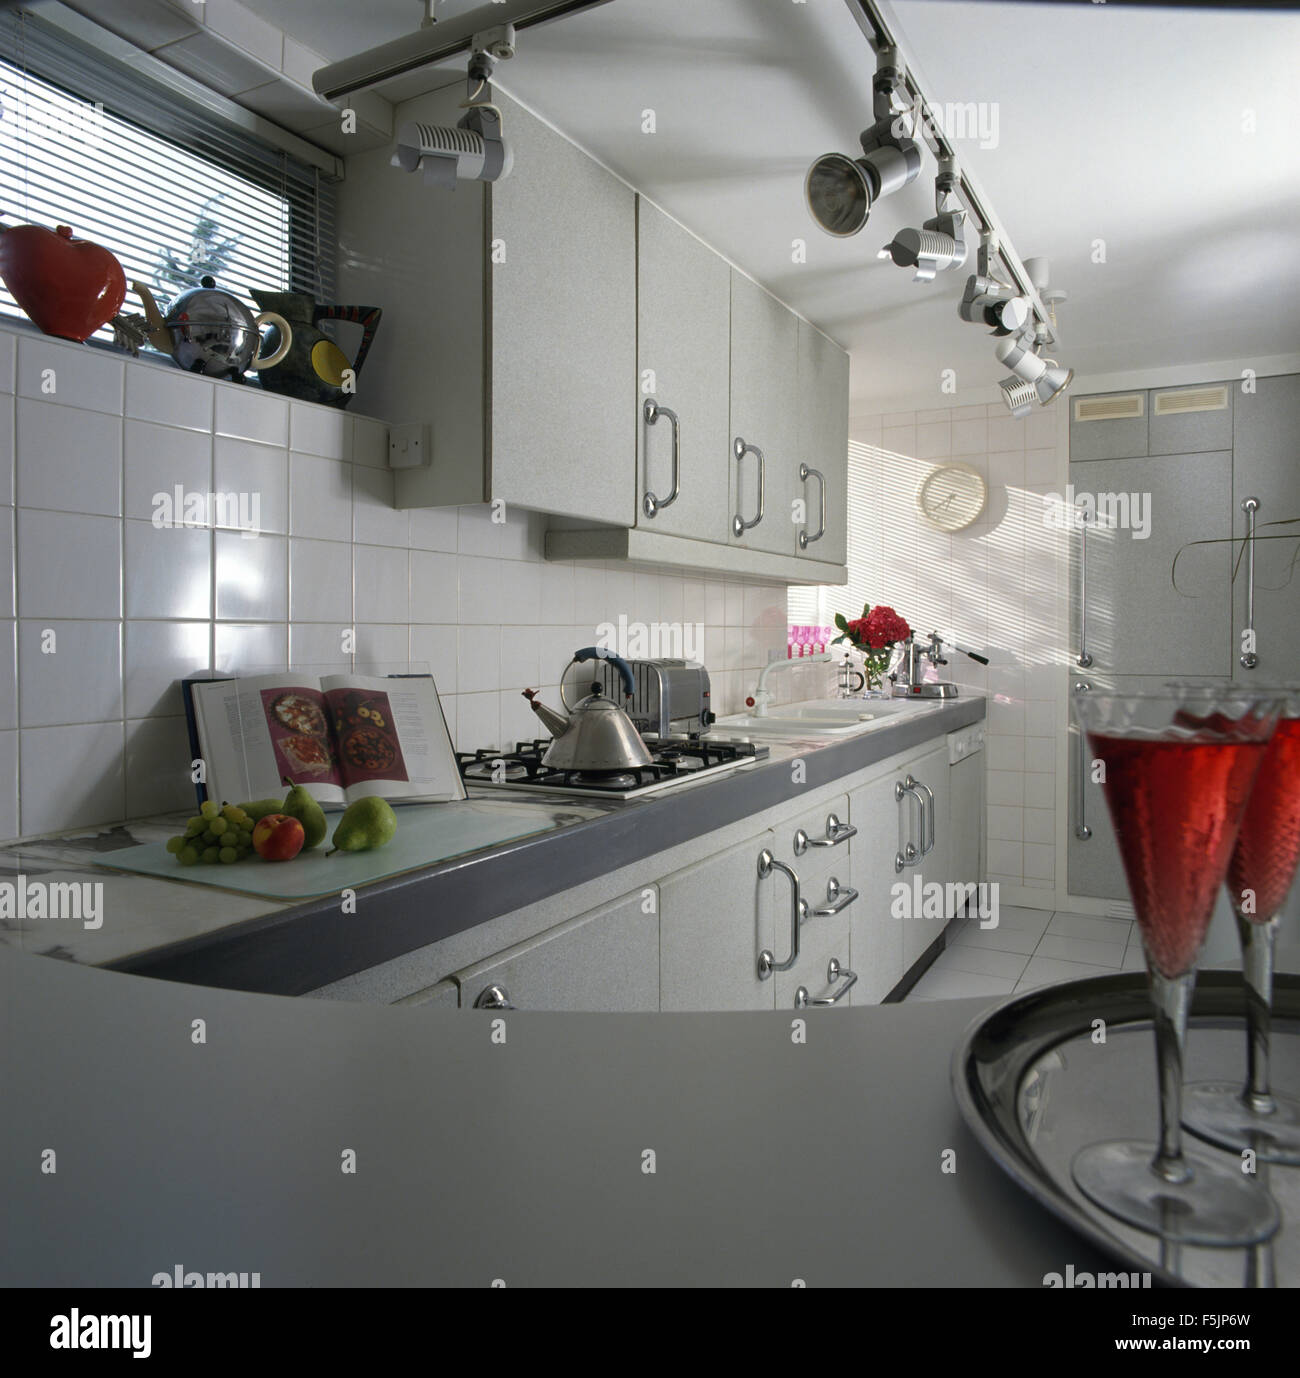 Track spotlights and white tiling in a nineties kitchen with pale gray fitted units and an Alessi kettle on the hob Stock Photo